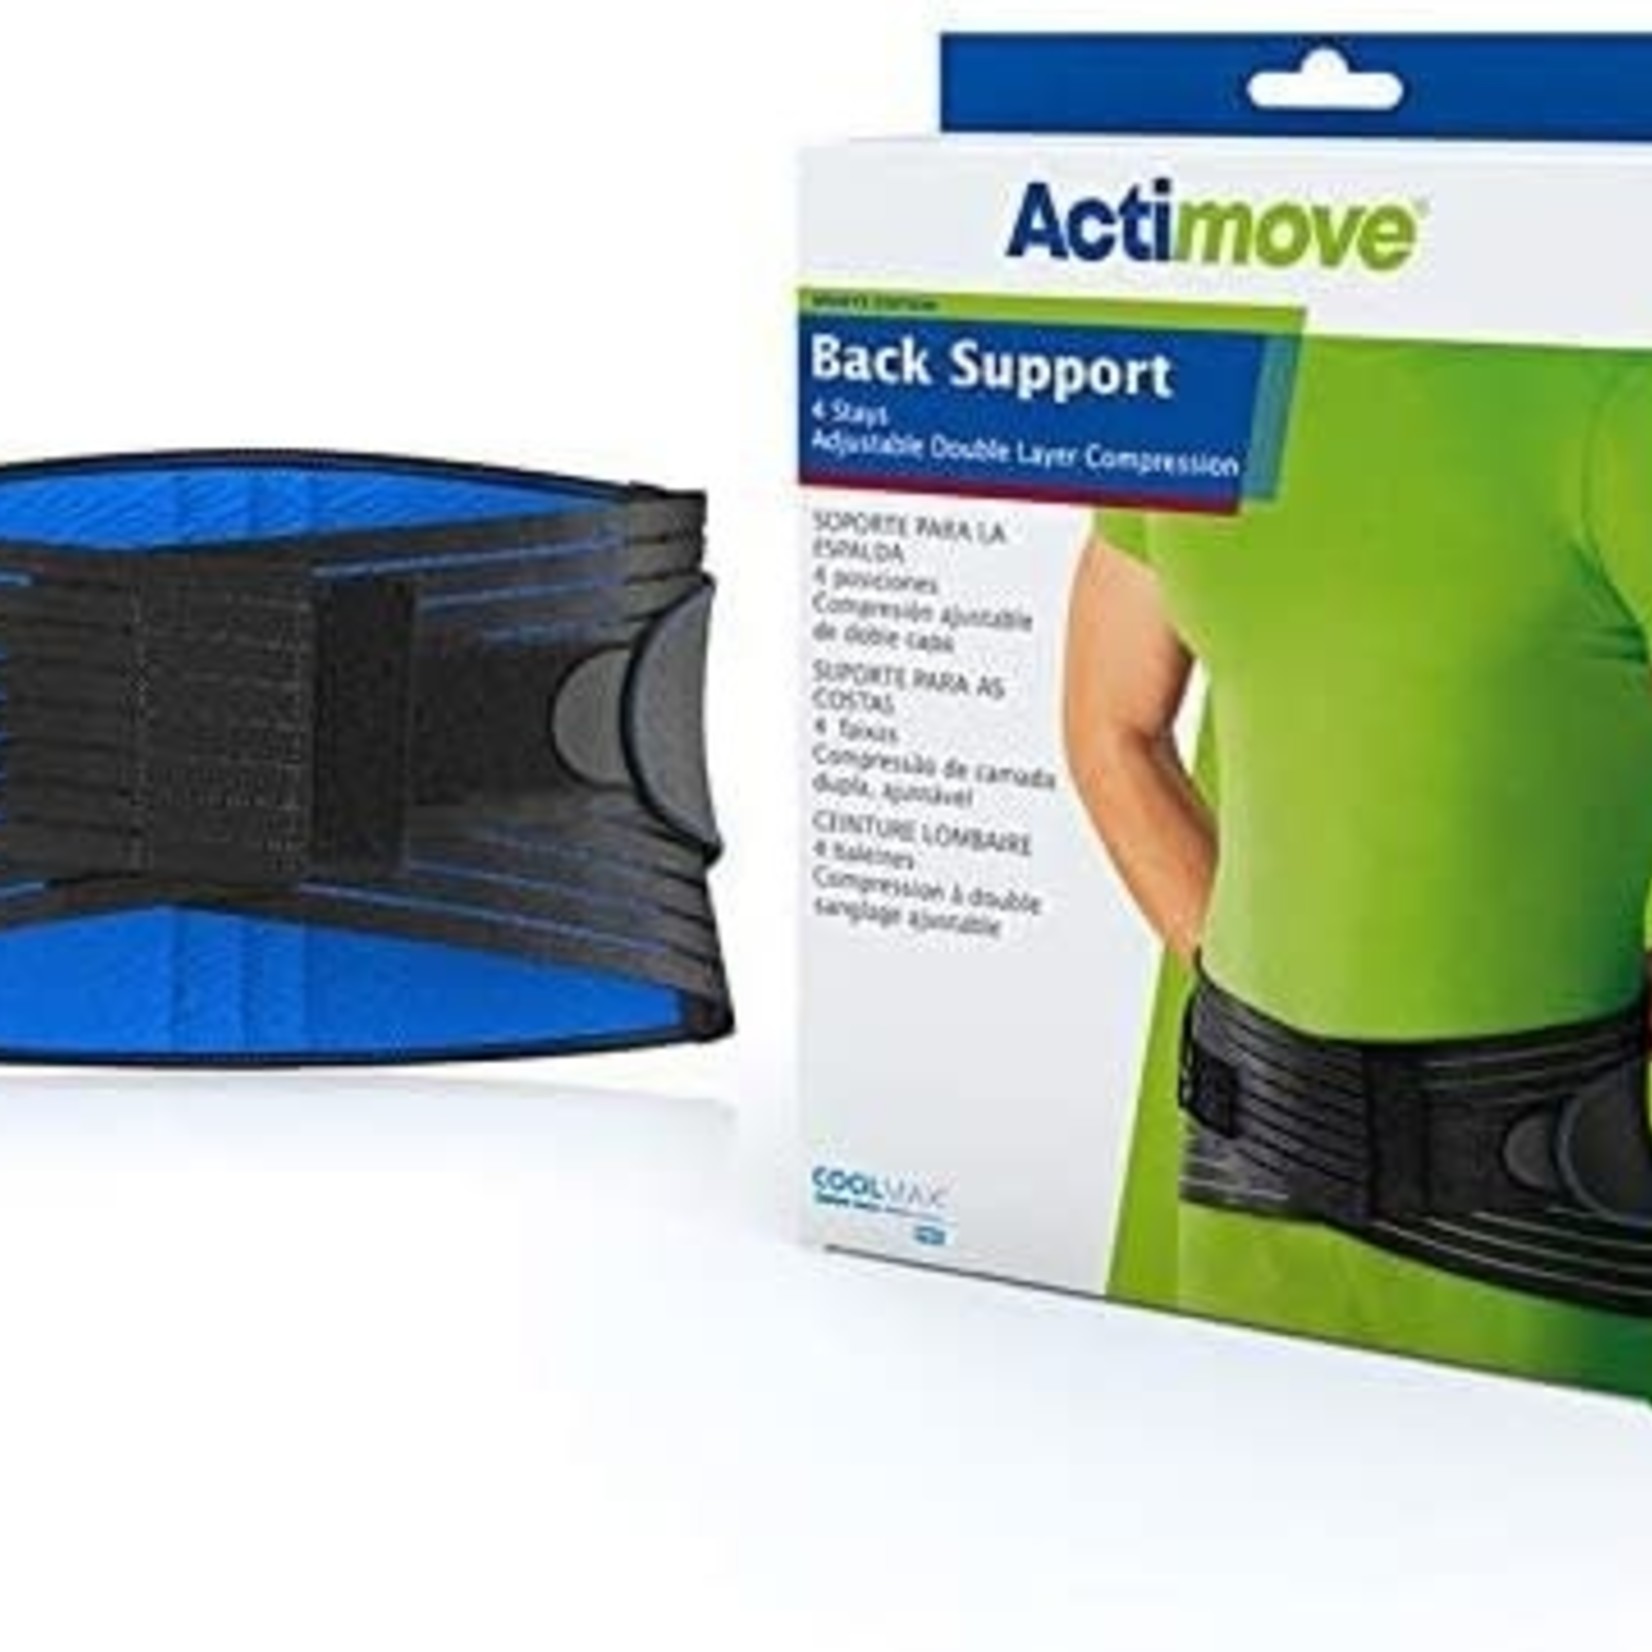 ActiMove Back Support